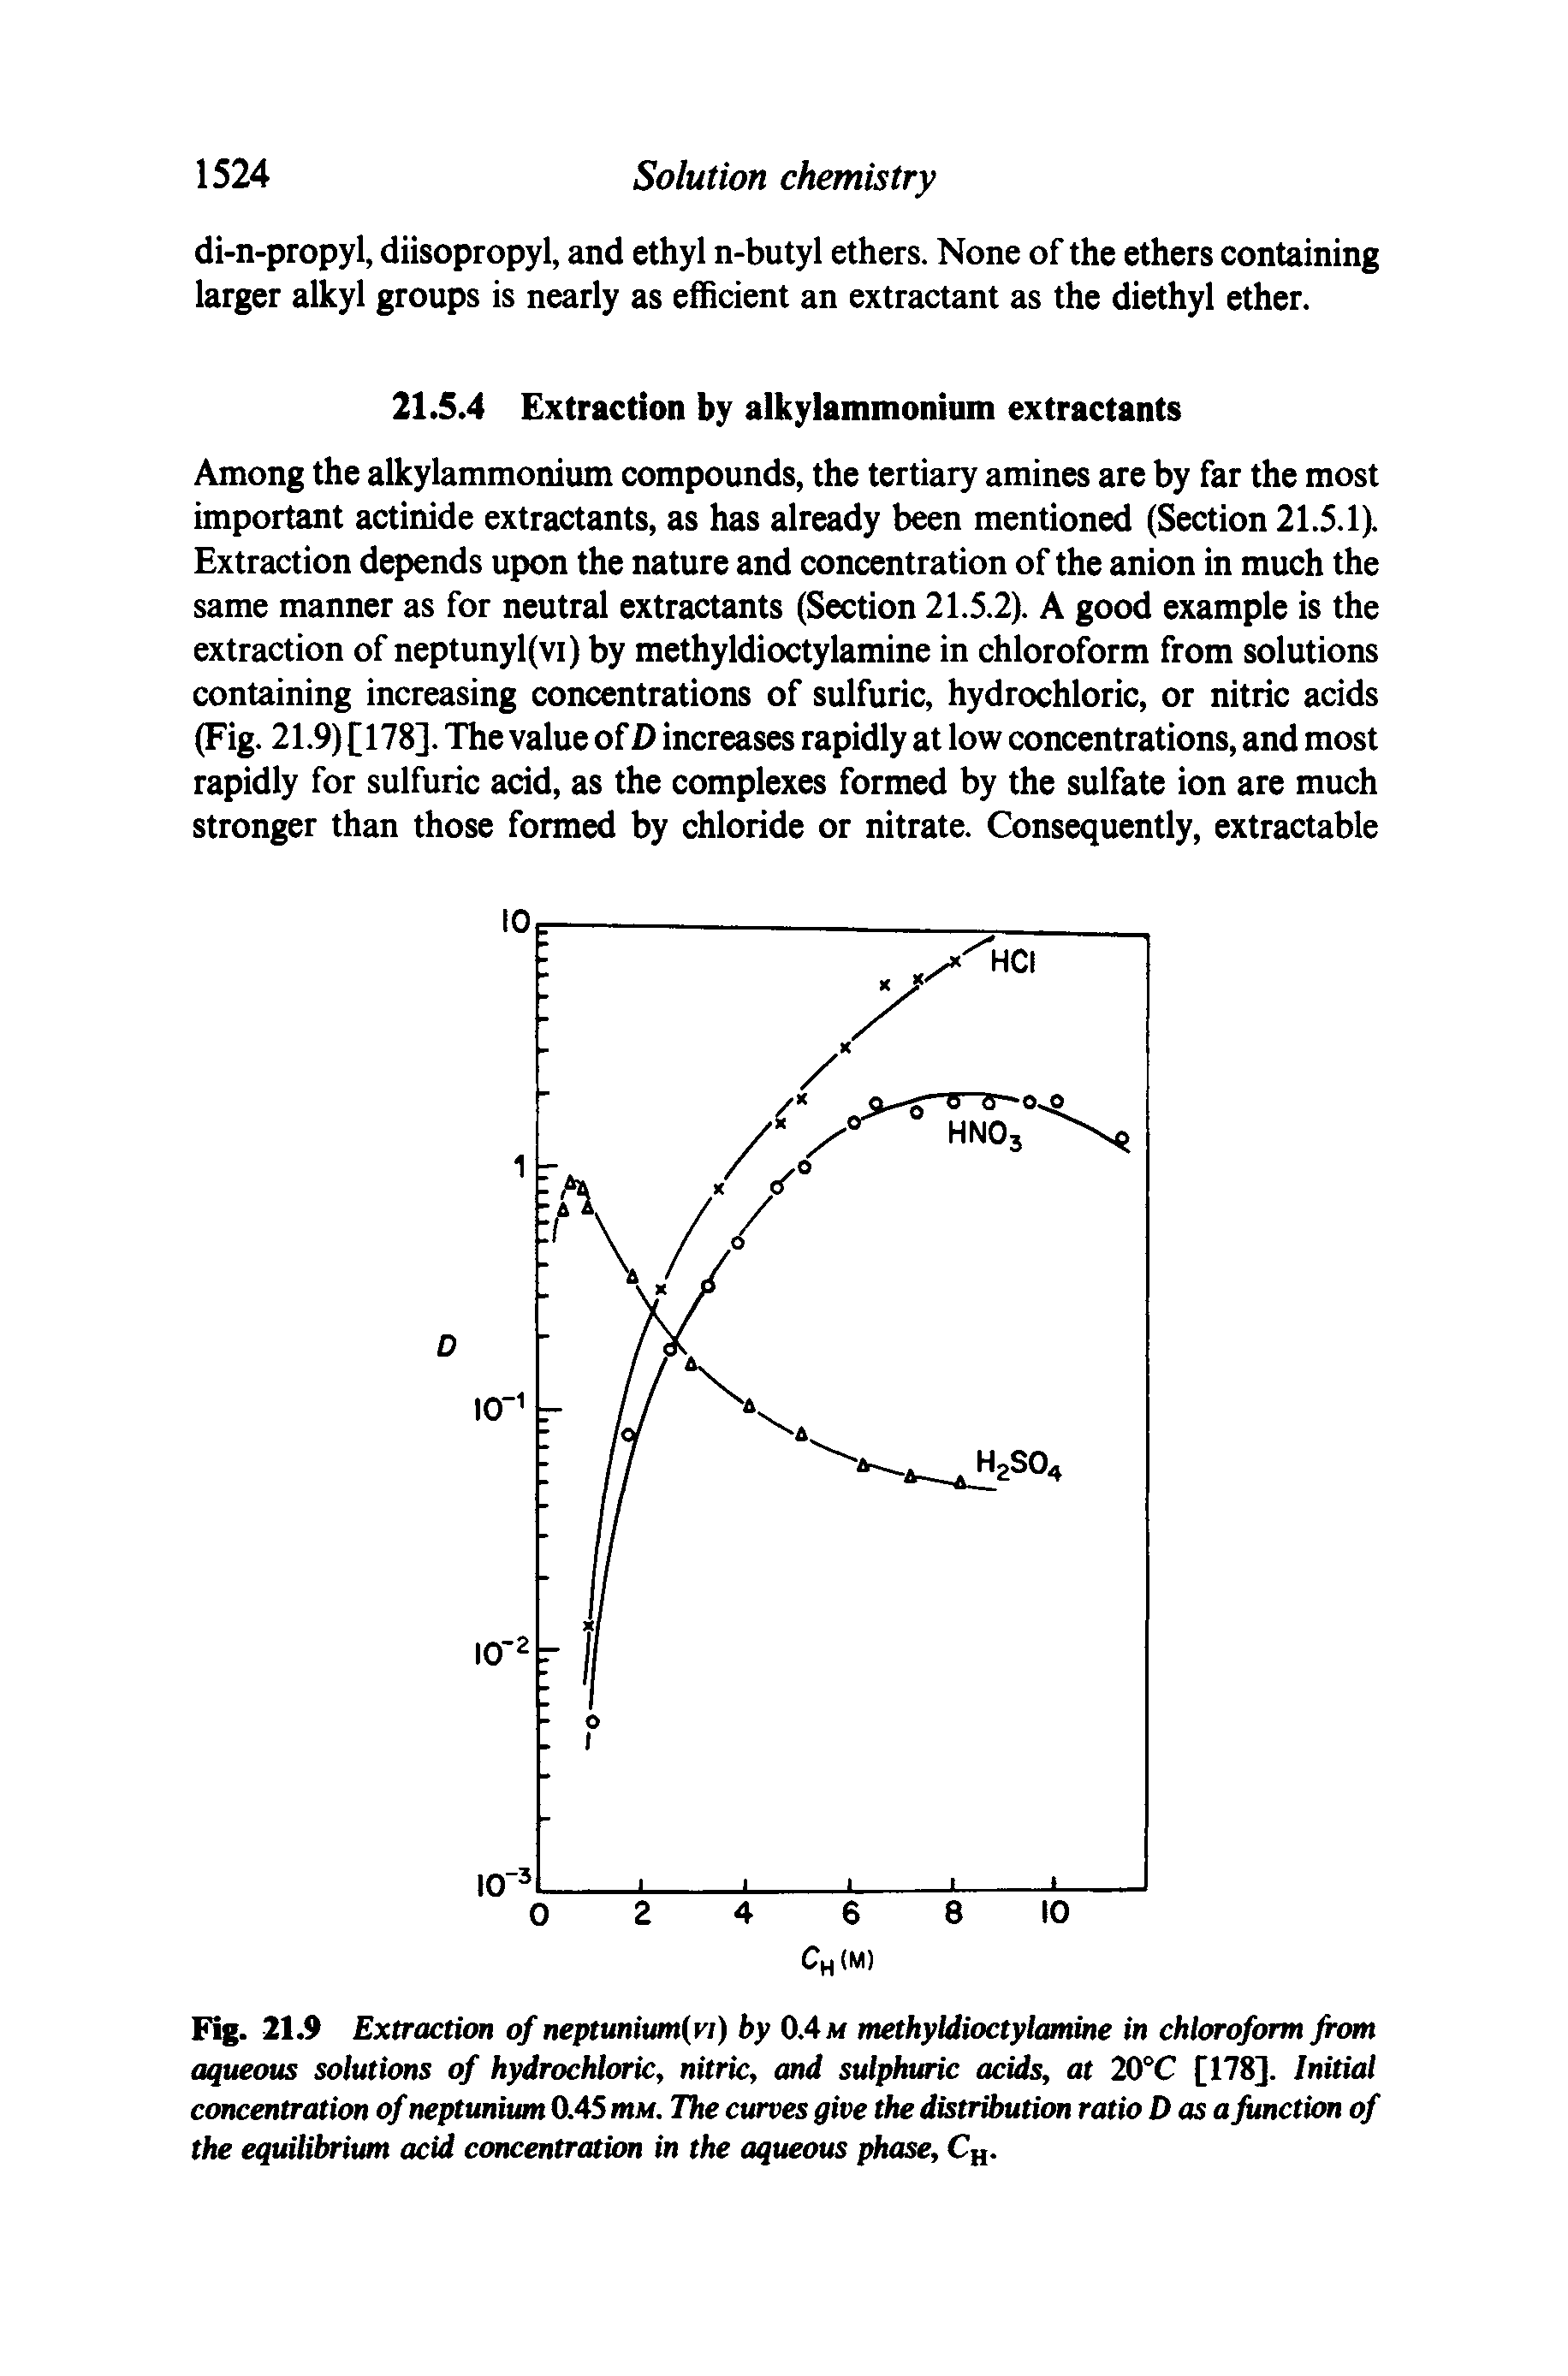 Fig. 21.9 Extraction of neptunium(vi) by 0.4 m methyldioctylamine in chloroform from aqueous solutions of hydrochloric, nitric, and sulphuric acids, at 20°C [178]. Initial concentration of neptunium 0.45 mu. The curves give the distribution ratio Das a function of the equilibrium acid concentration in the aqueous phase, Cg.